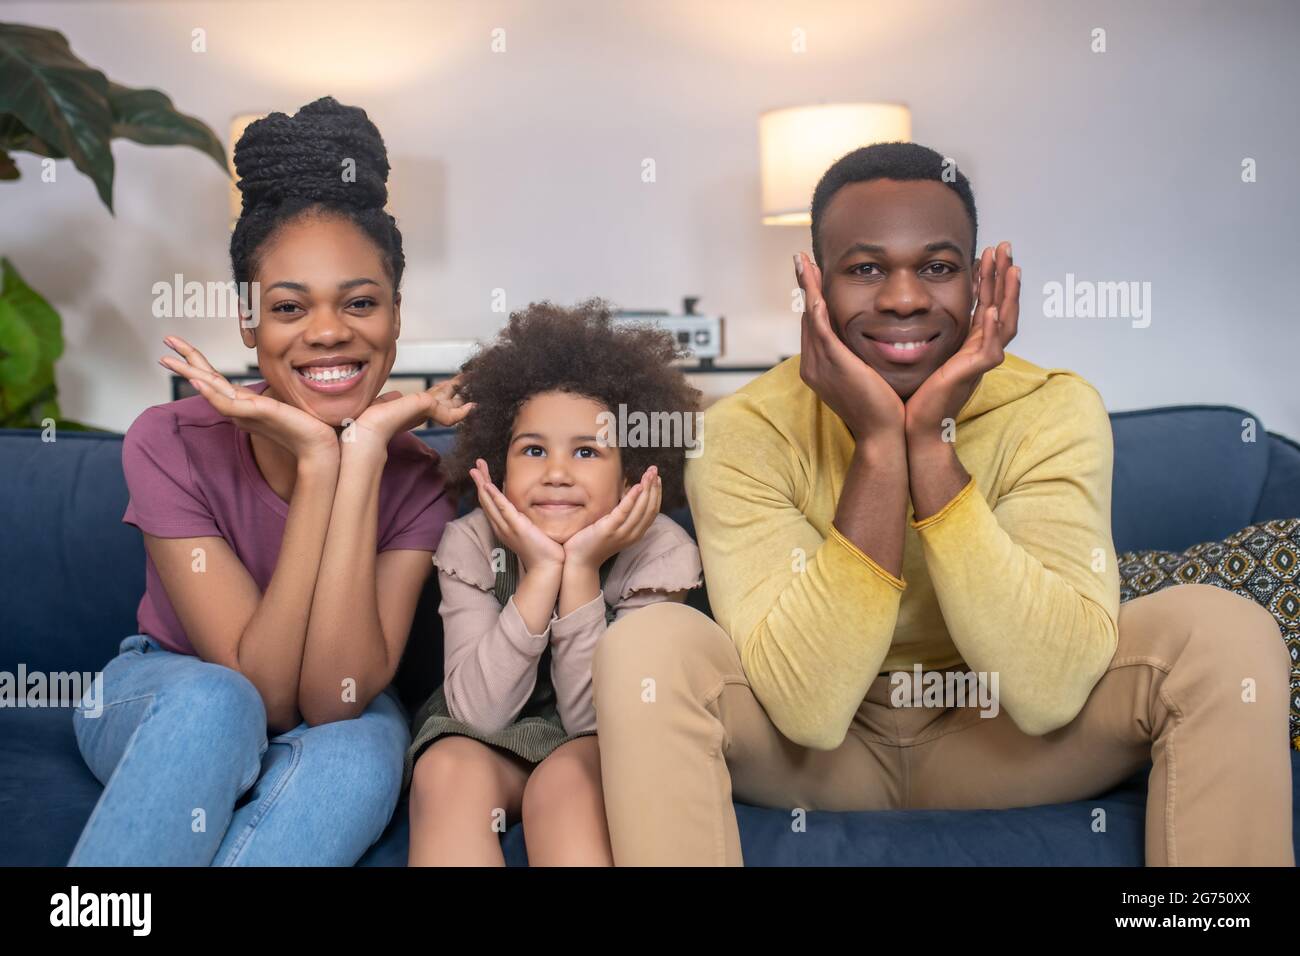 Man woman and little girl cheerful sitting on couch Stock Photo